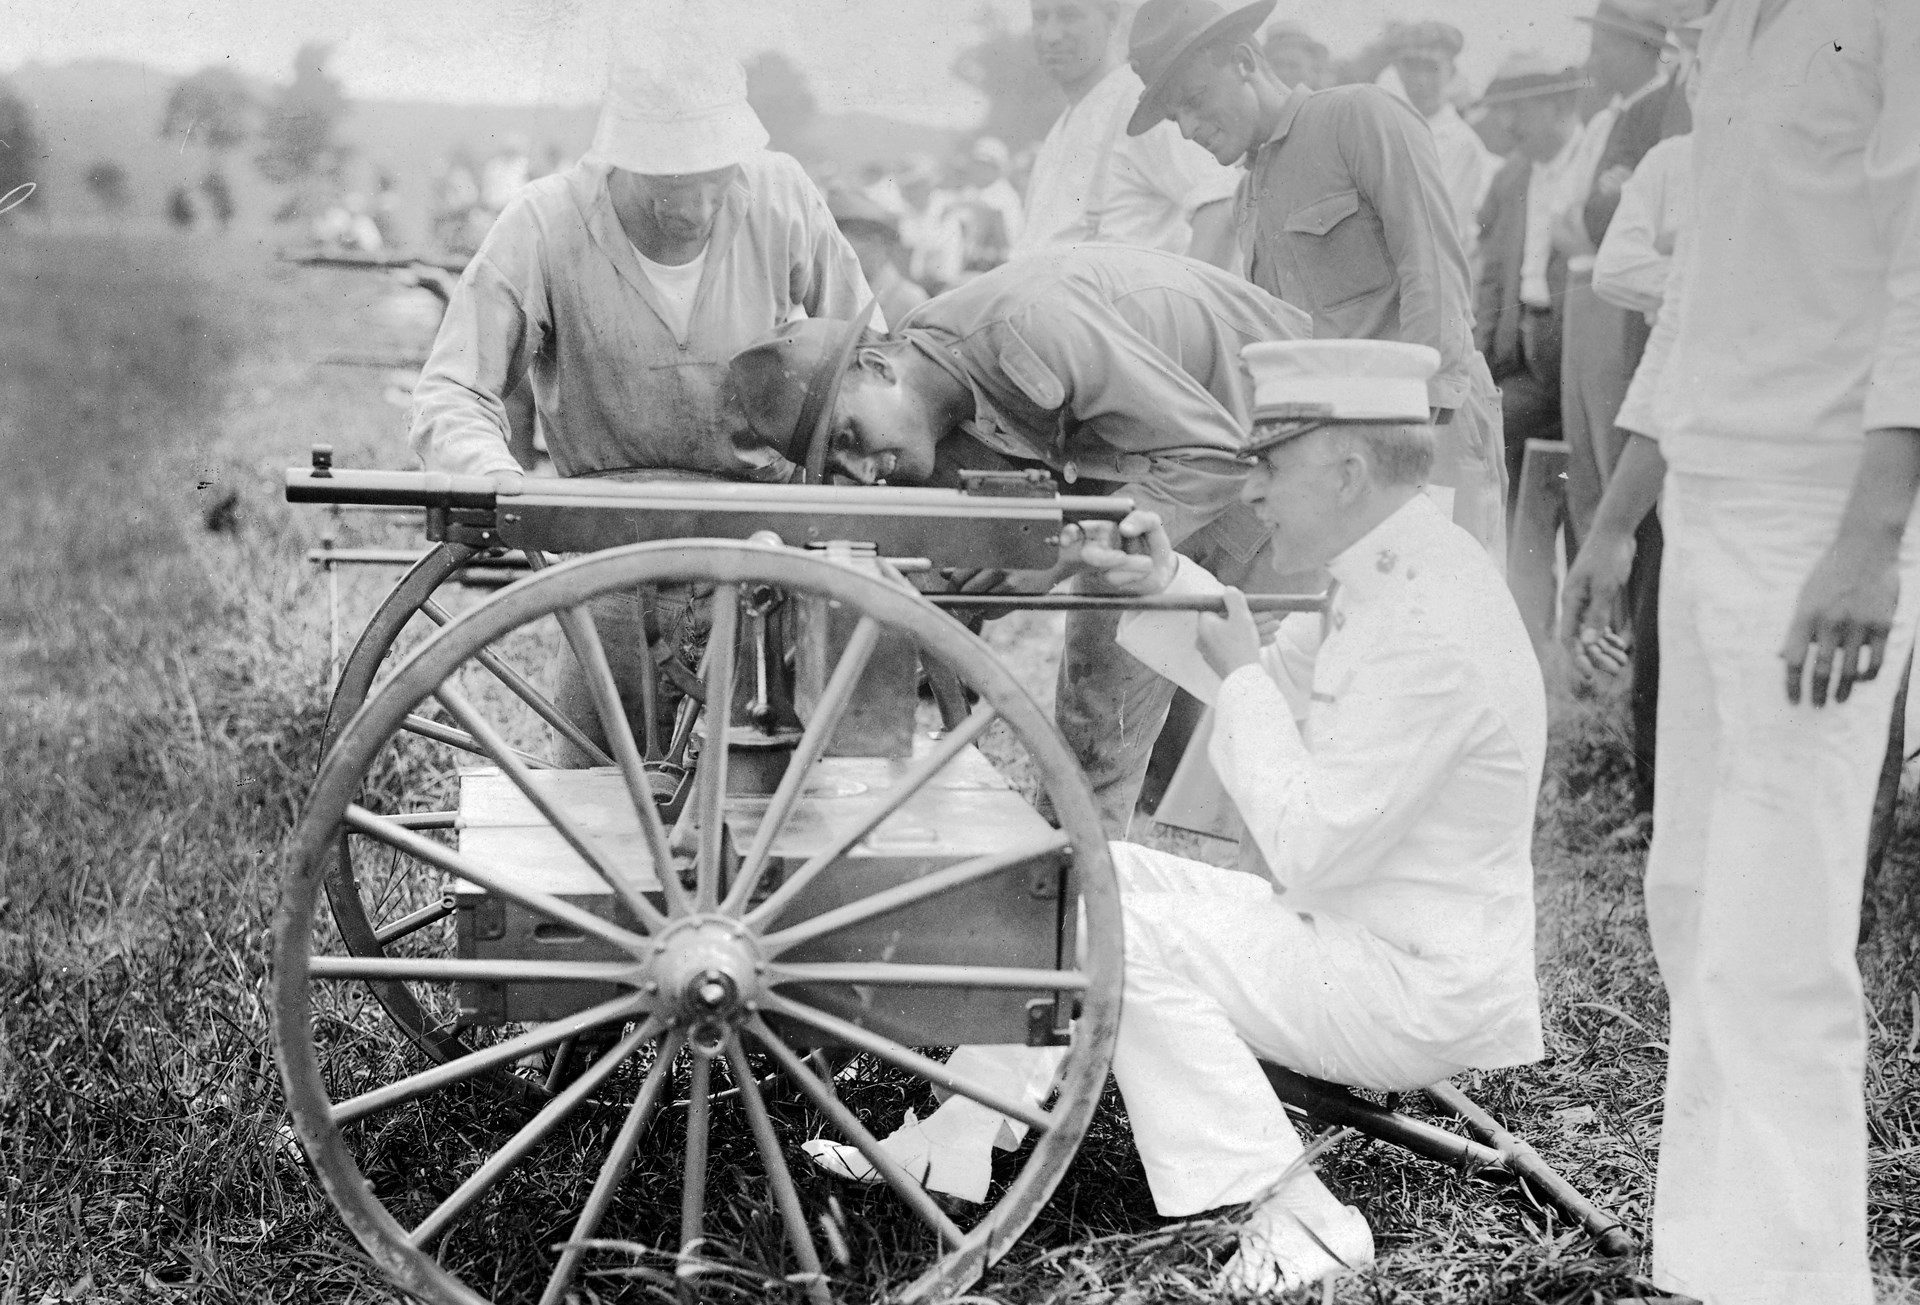 6)	General Barnett tests “Colt’s Automatic Gun” at the Winthrop, Md., range during 1917.